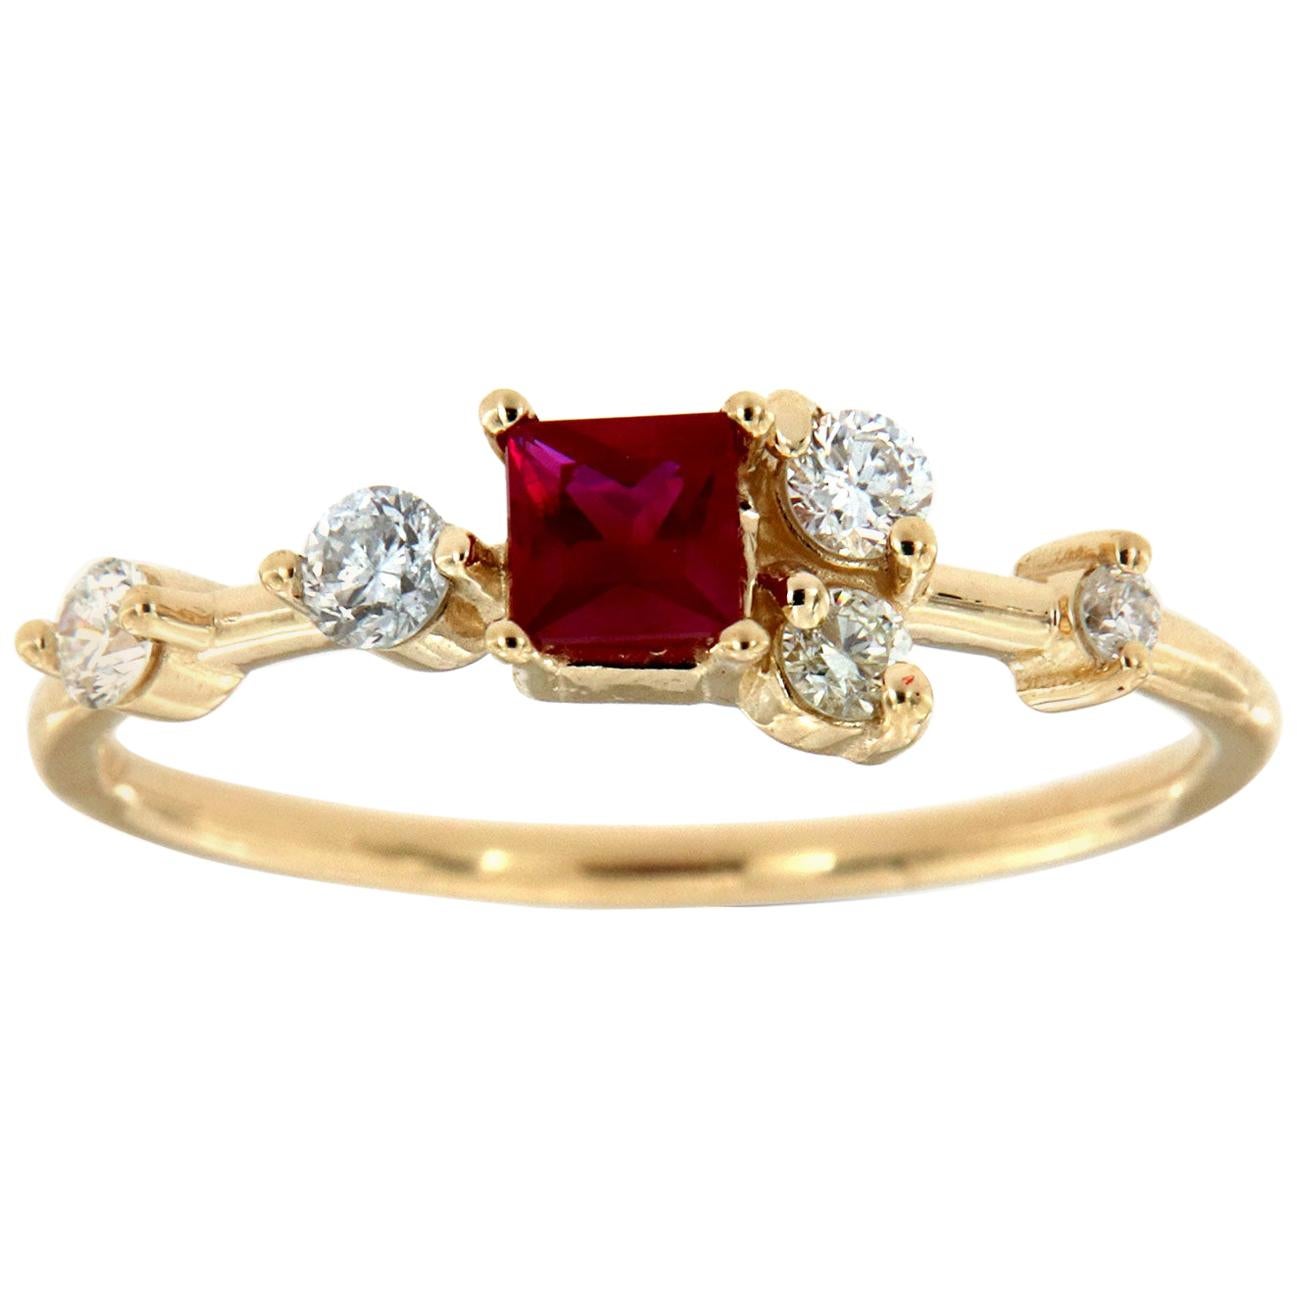 14K Yellow Gold Petite Organic Red Square Ruby Diamond Ring Center 0.27 Carat For Sale